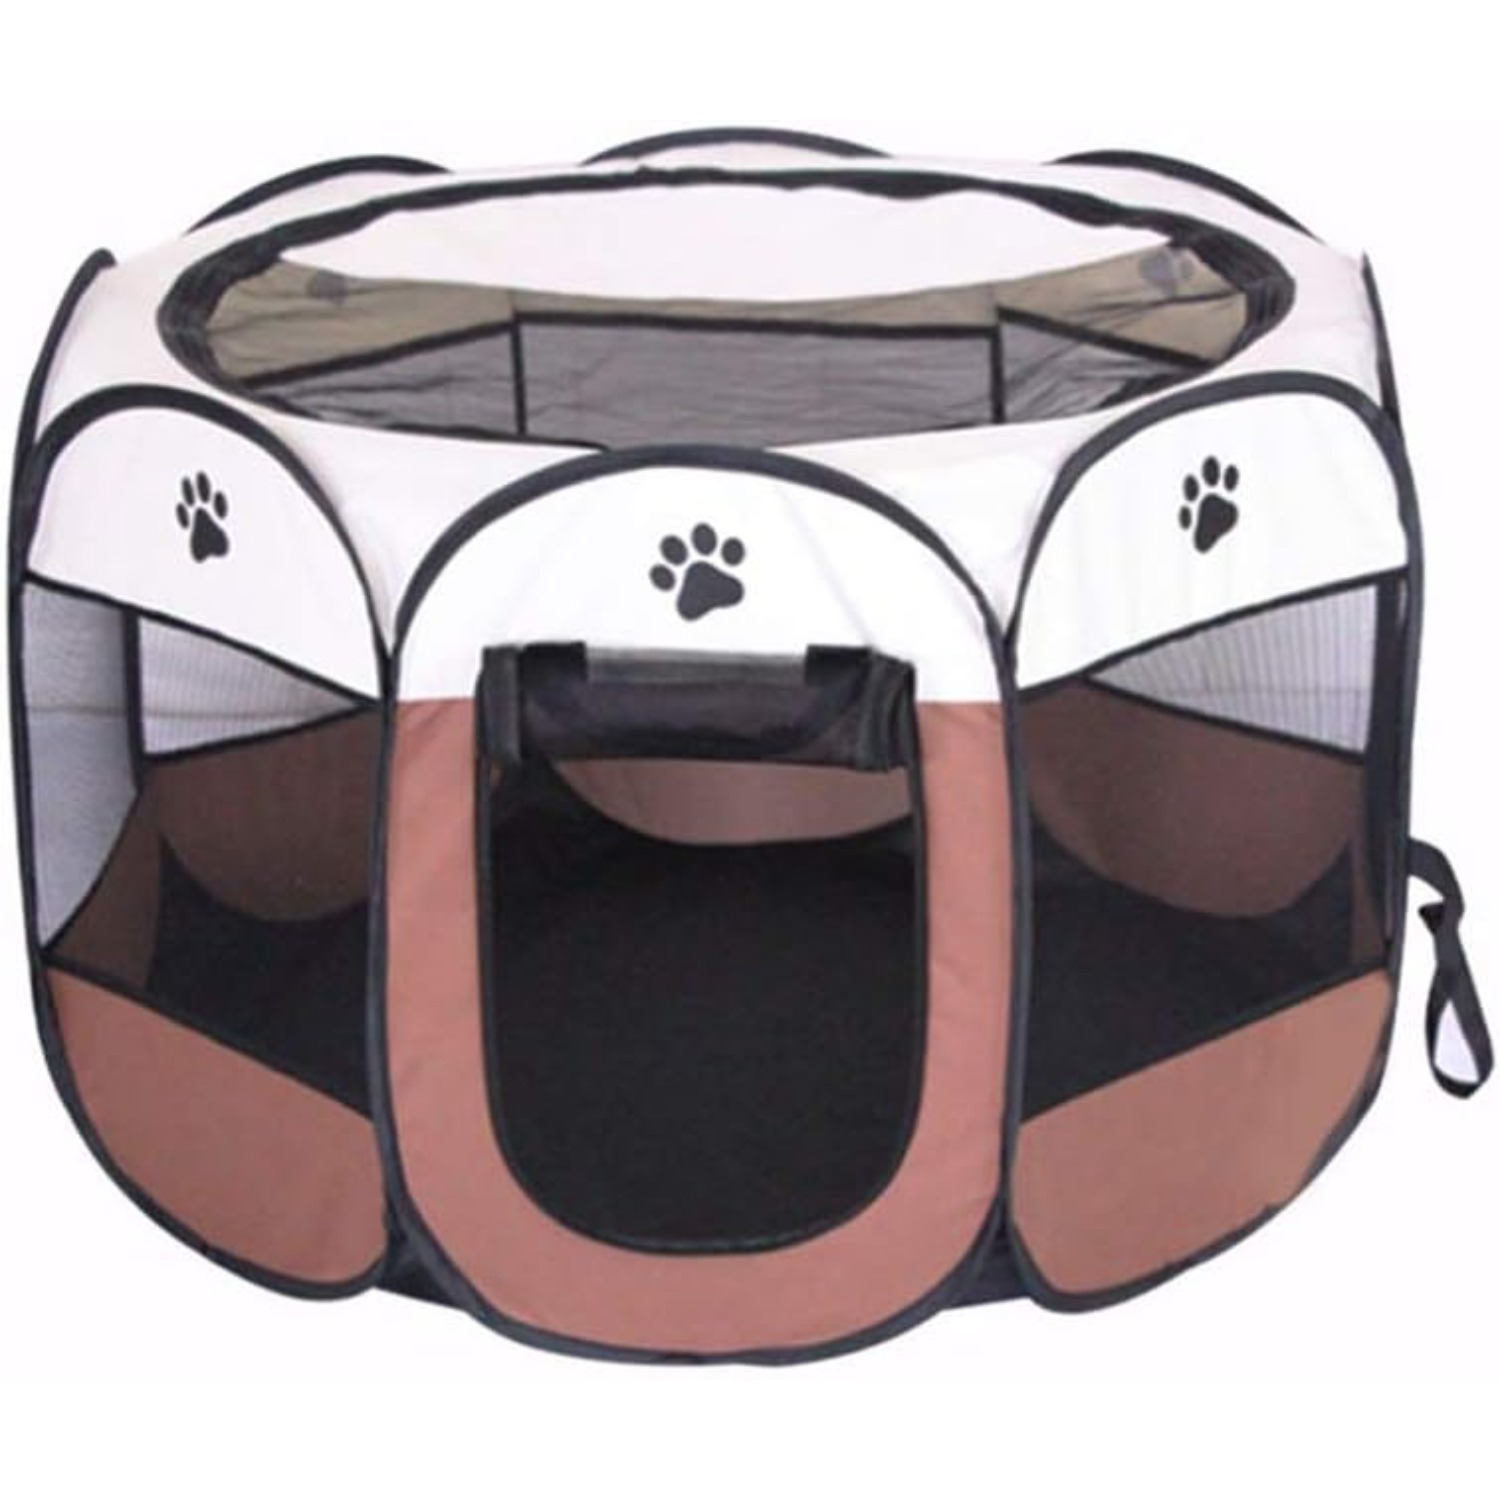 

Portable Pet Playpen, Dog Playpen Foldable Pet Sports Pen Tent Kennel House York Cat Rabbit Indoor Outdoor Travel Camping Use (large, Coffee - Beige)